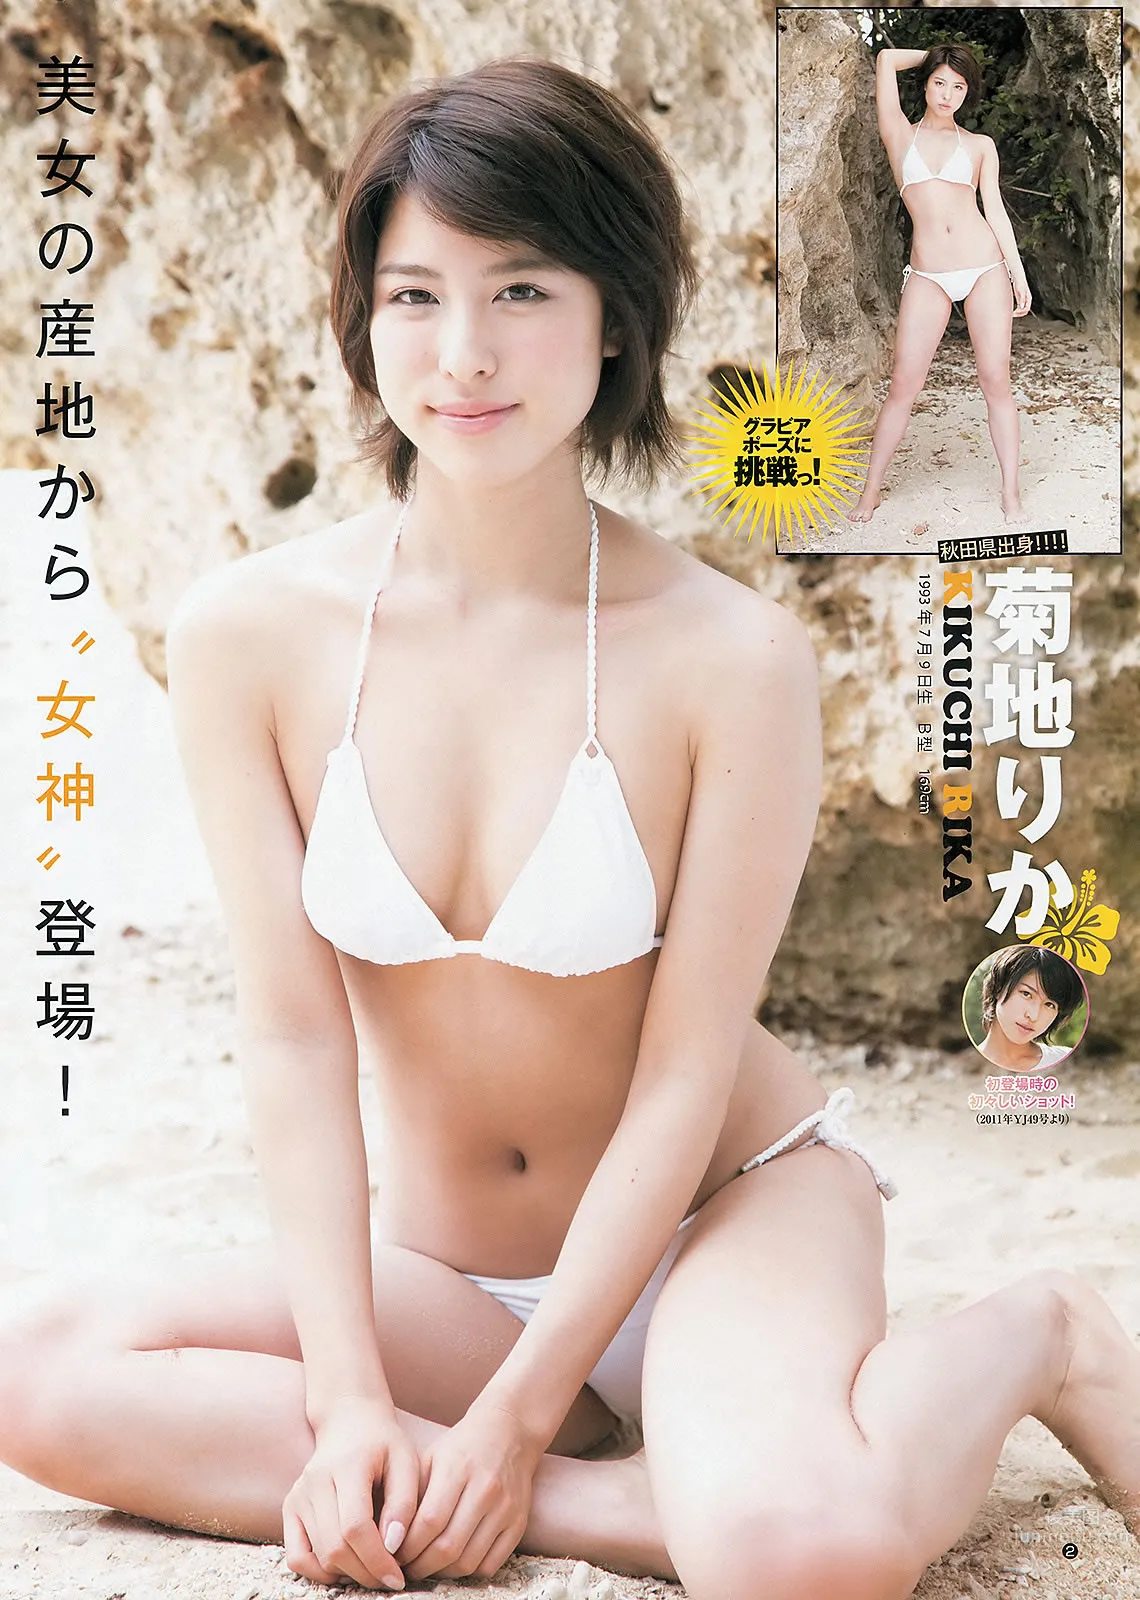 [Weekly Young Jump] 2013 No.18 19 日南响子 中村静香 モーニング娘。 西内まりや [28P]_24